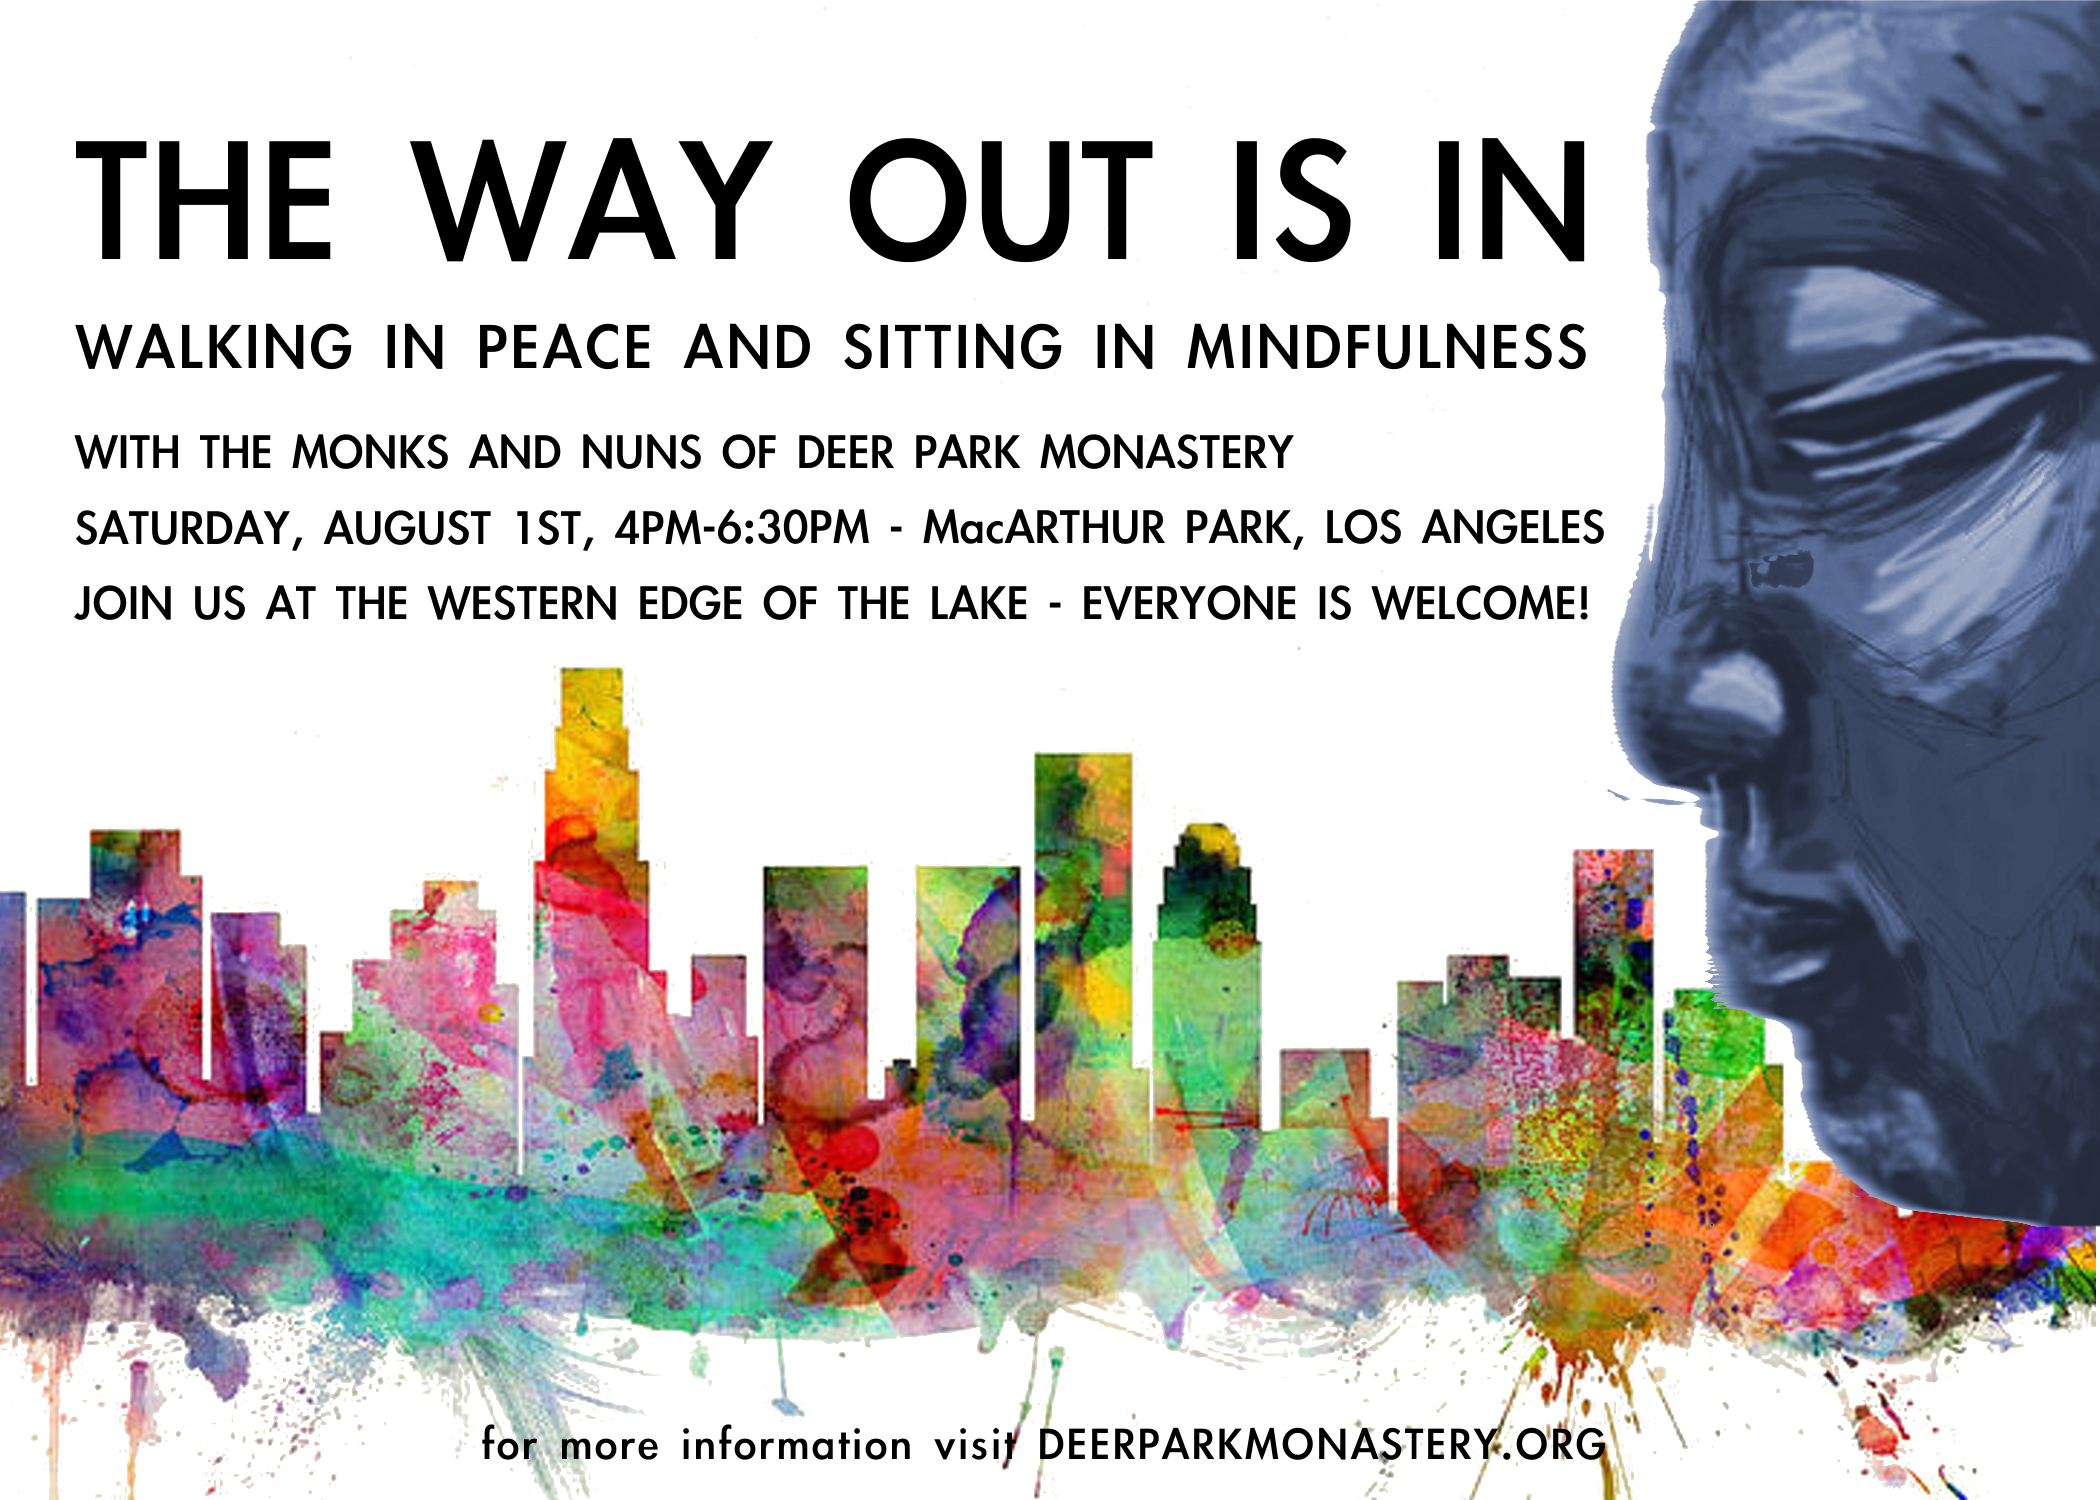 Walking for Peace, Sitting in Mindfulness. LA event.